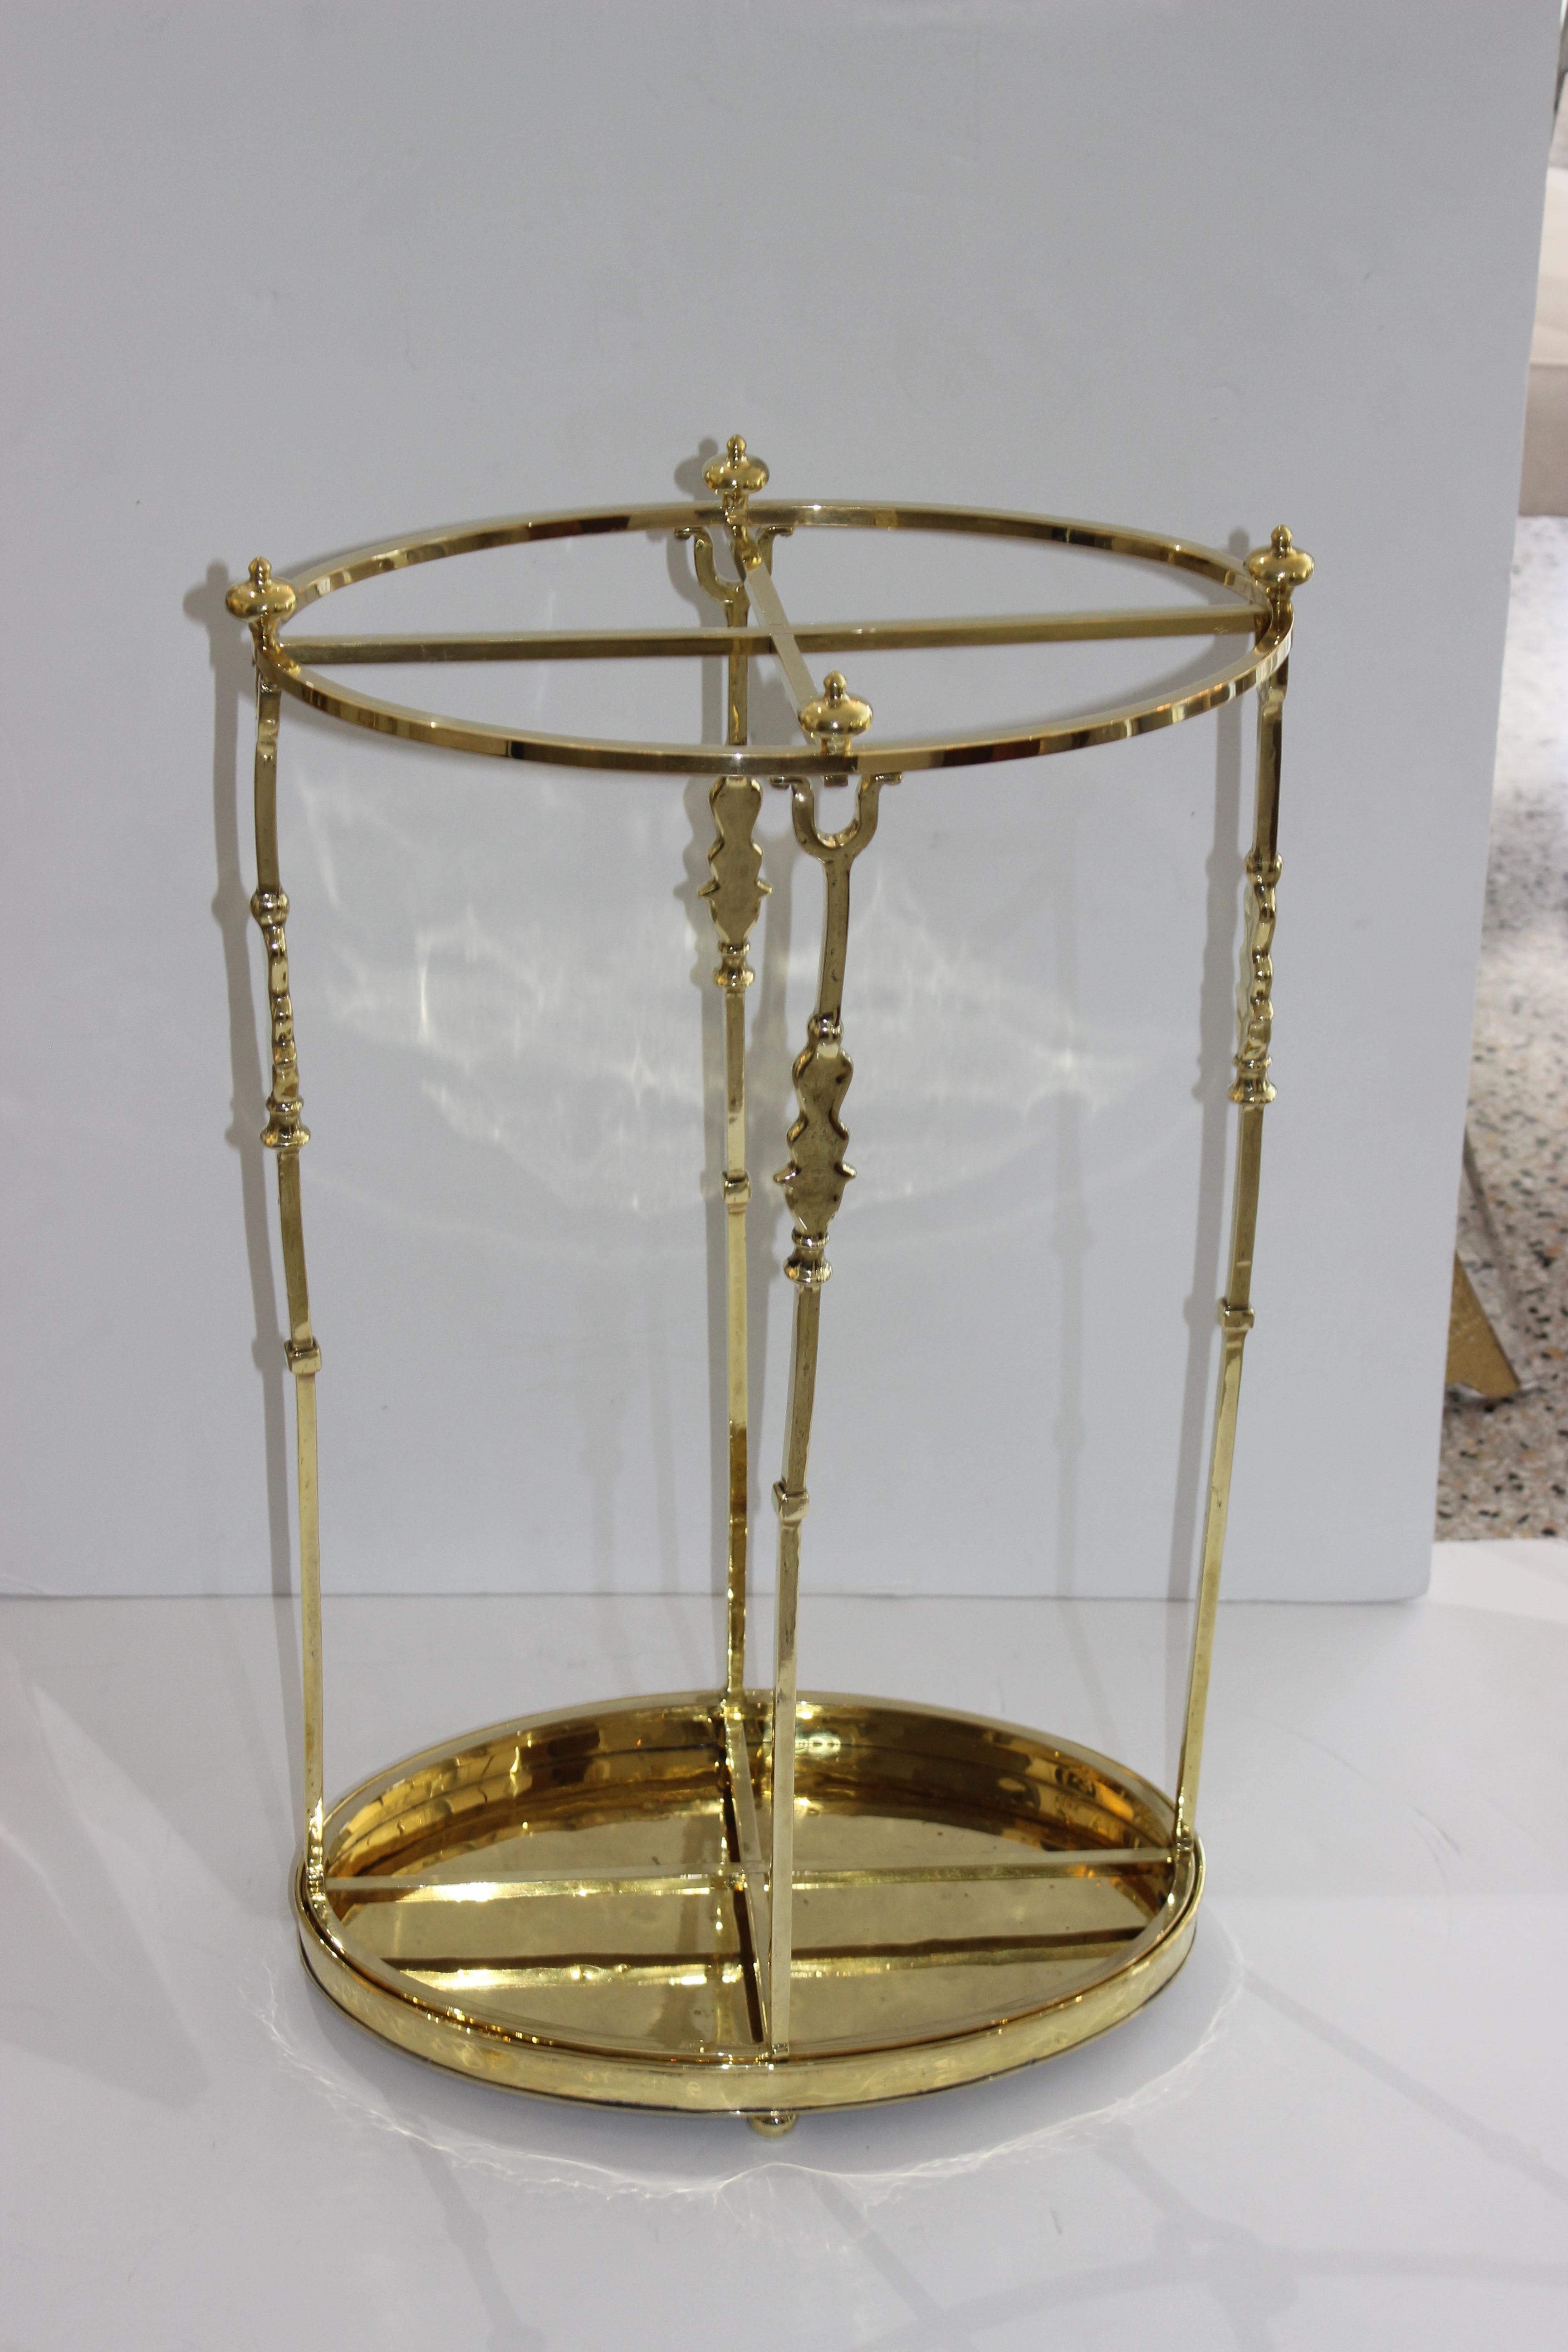 This large scale, stylish and chic polished brass umbrella stand was acquired from an estate in Paris and has been professionally polished and lacquered and thus no tarnishing. 

Note: The bottom tray is removable for cleaning purposes.

Note: 